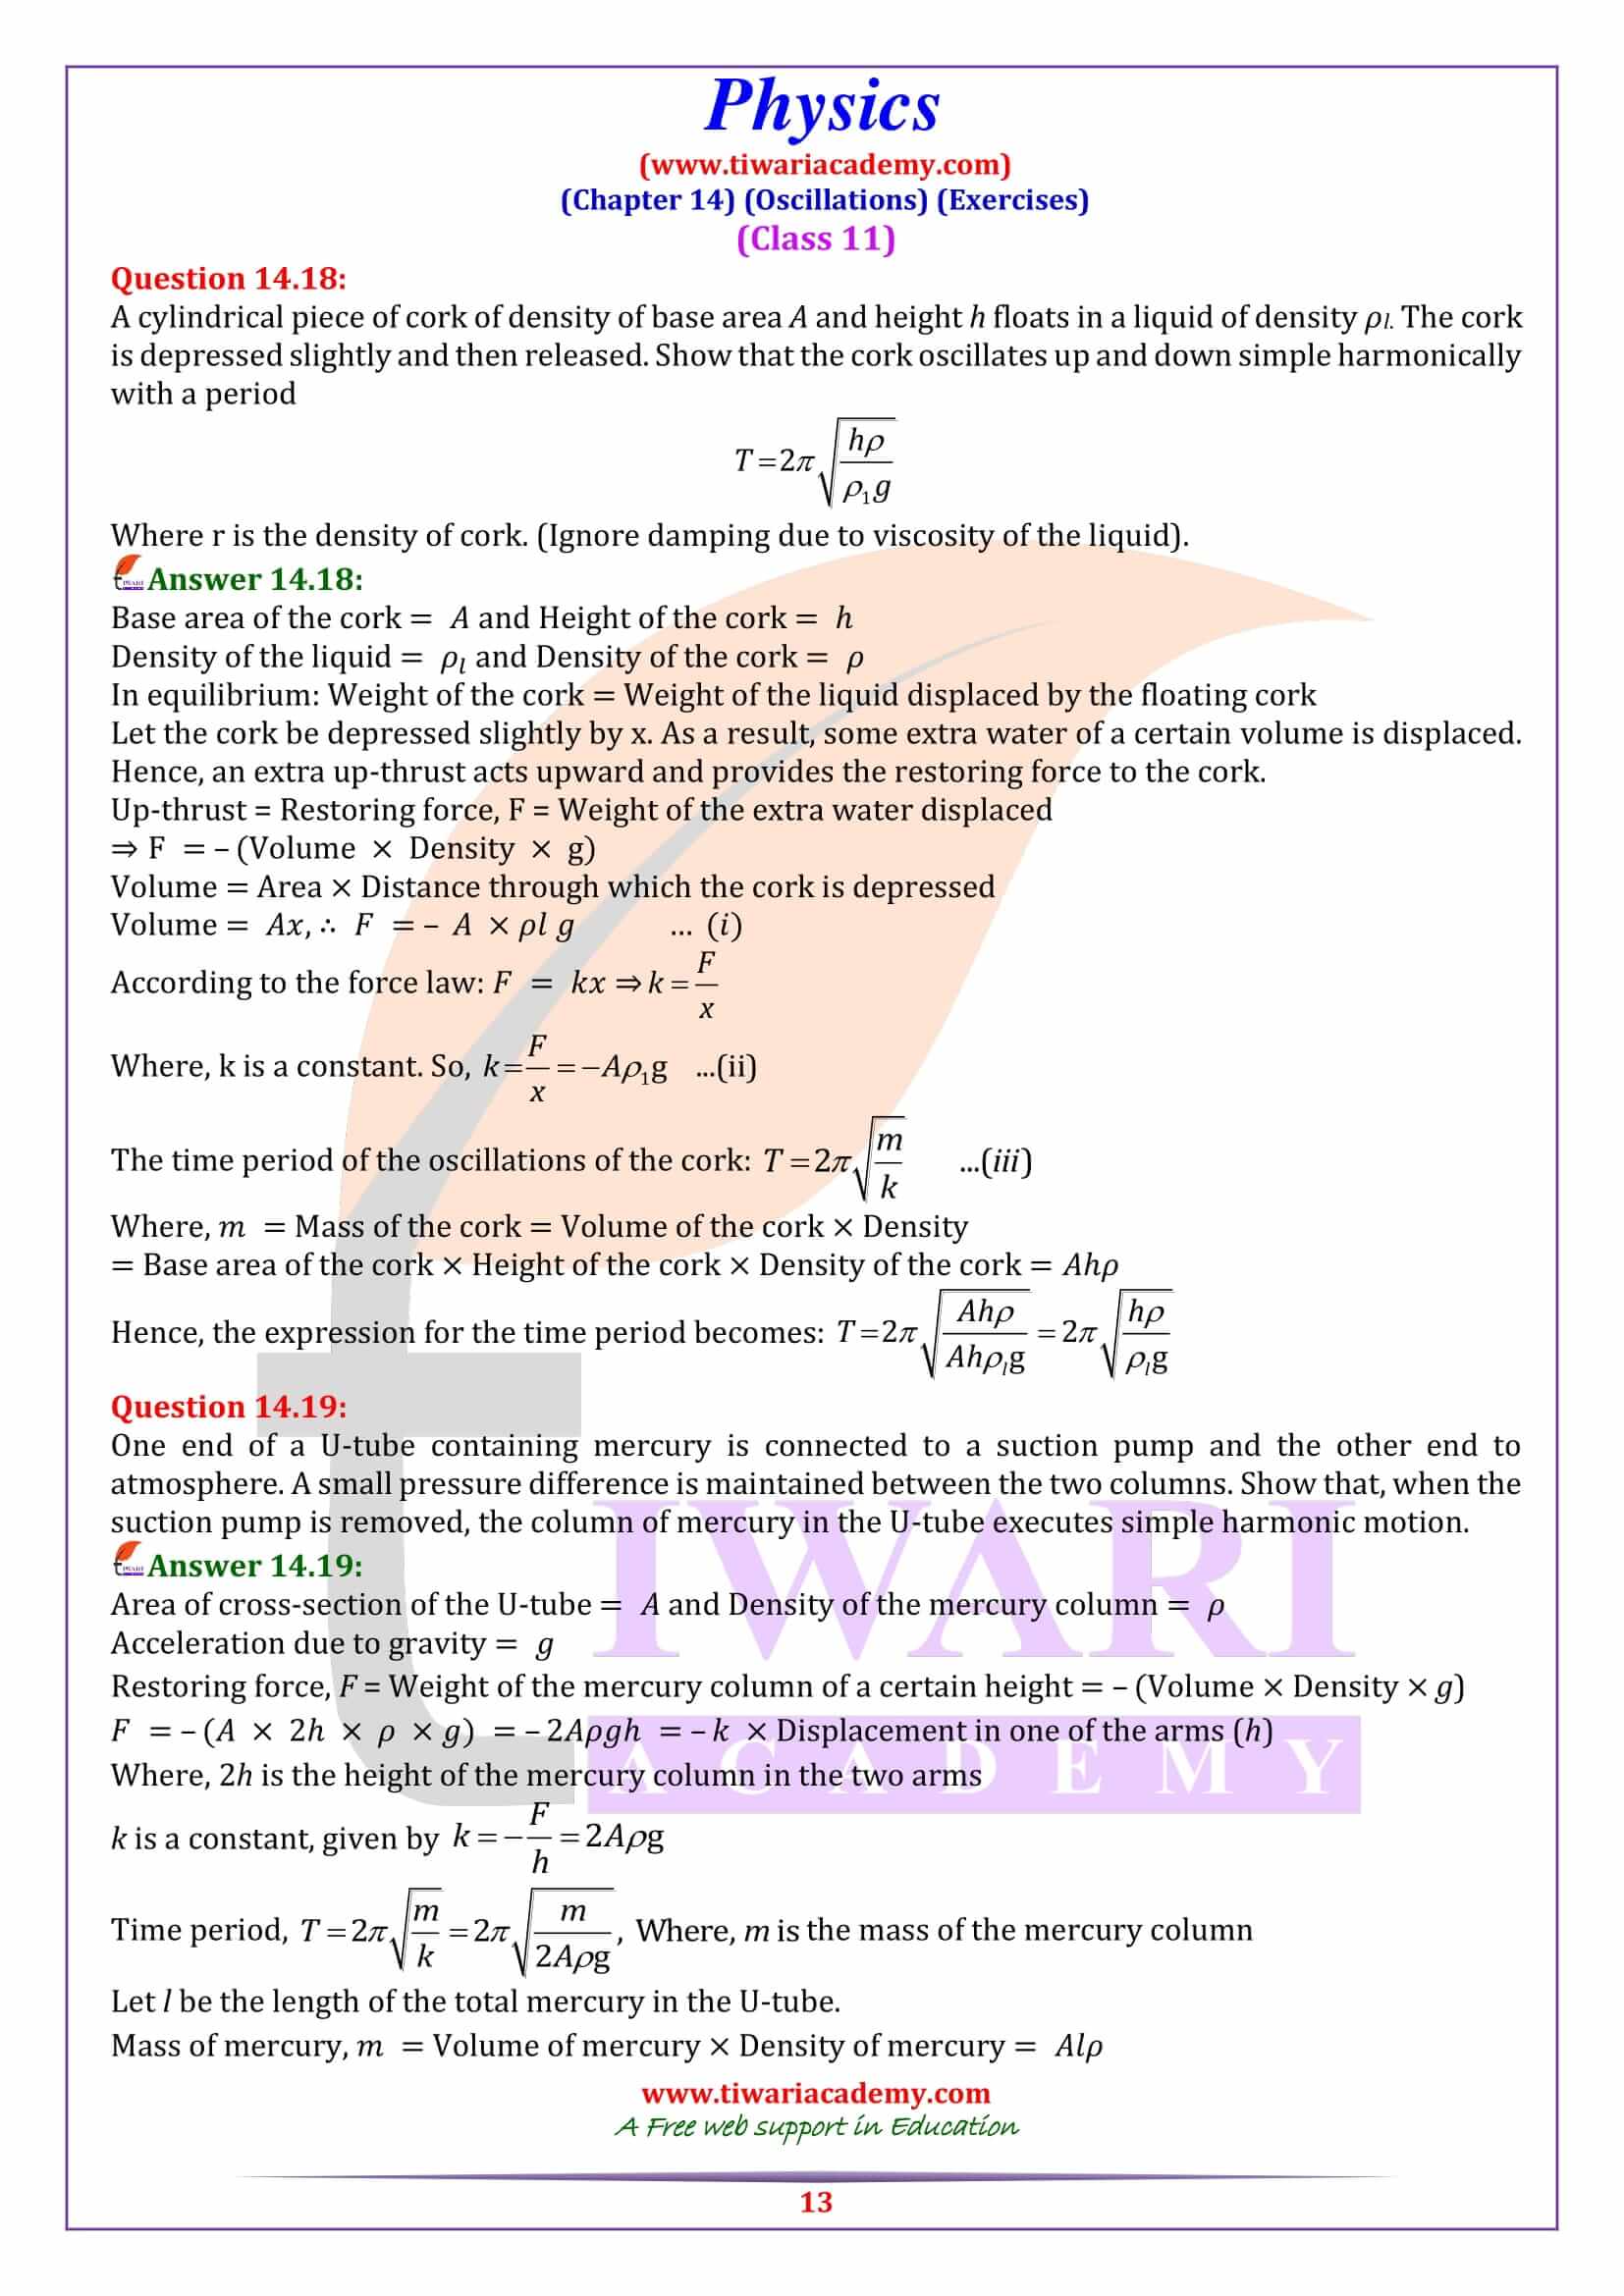 Class 11 Physics Chapter 14 downloand PDF